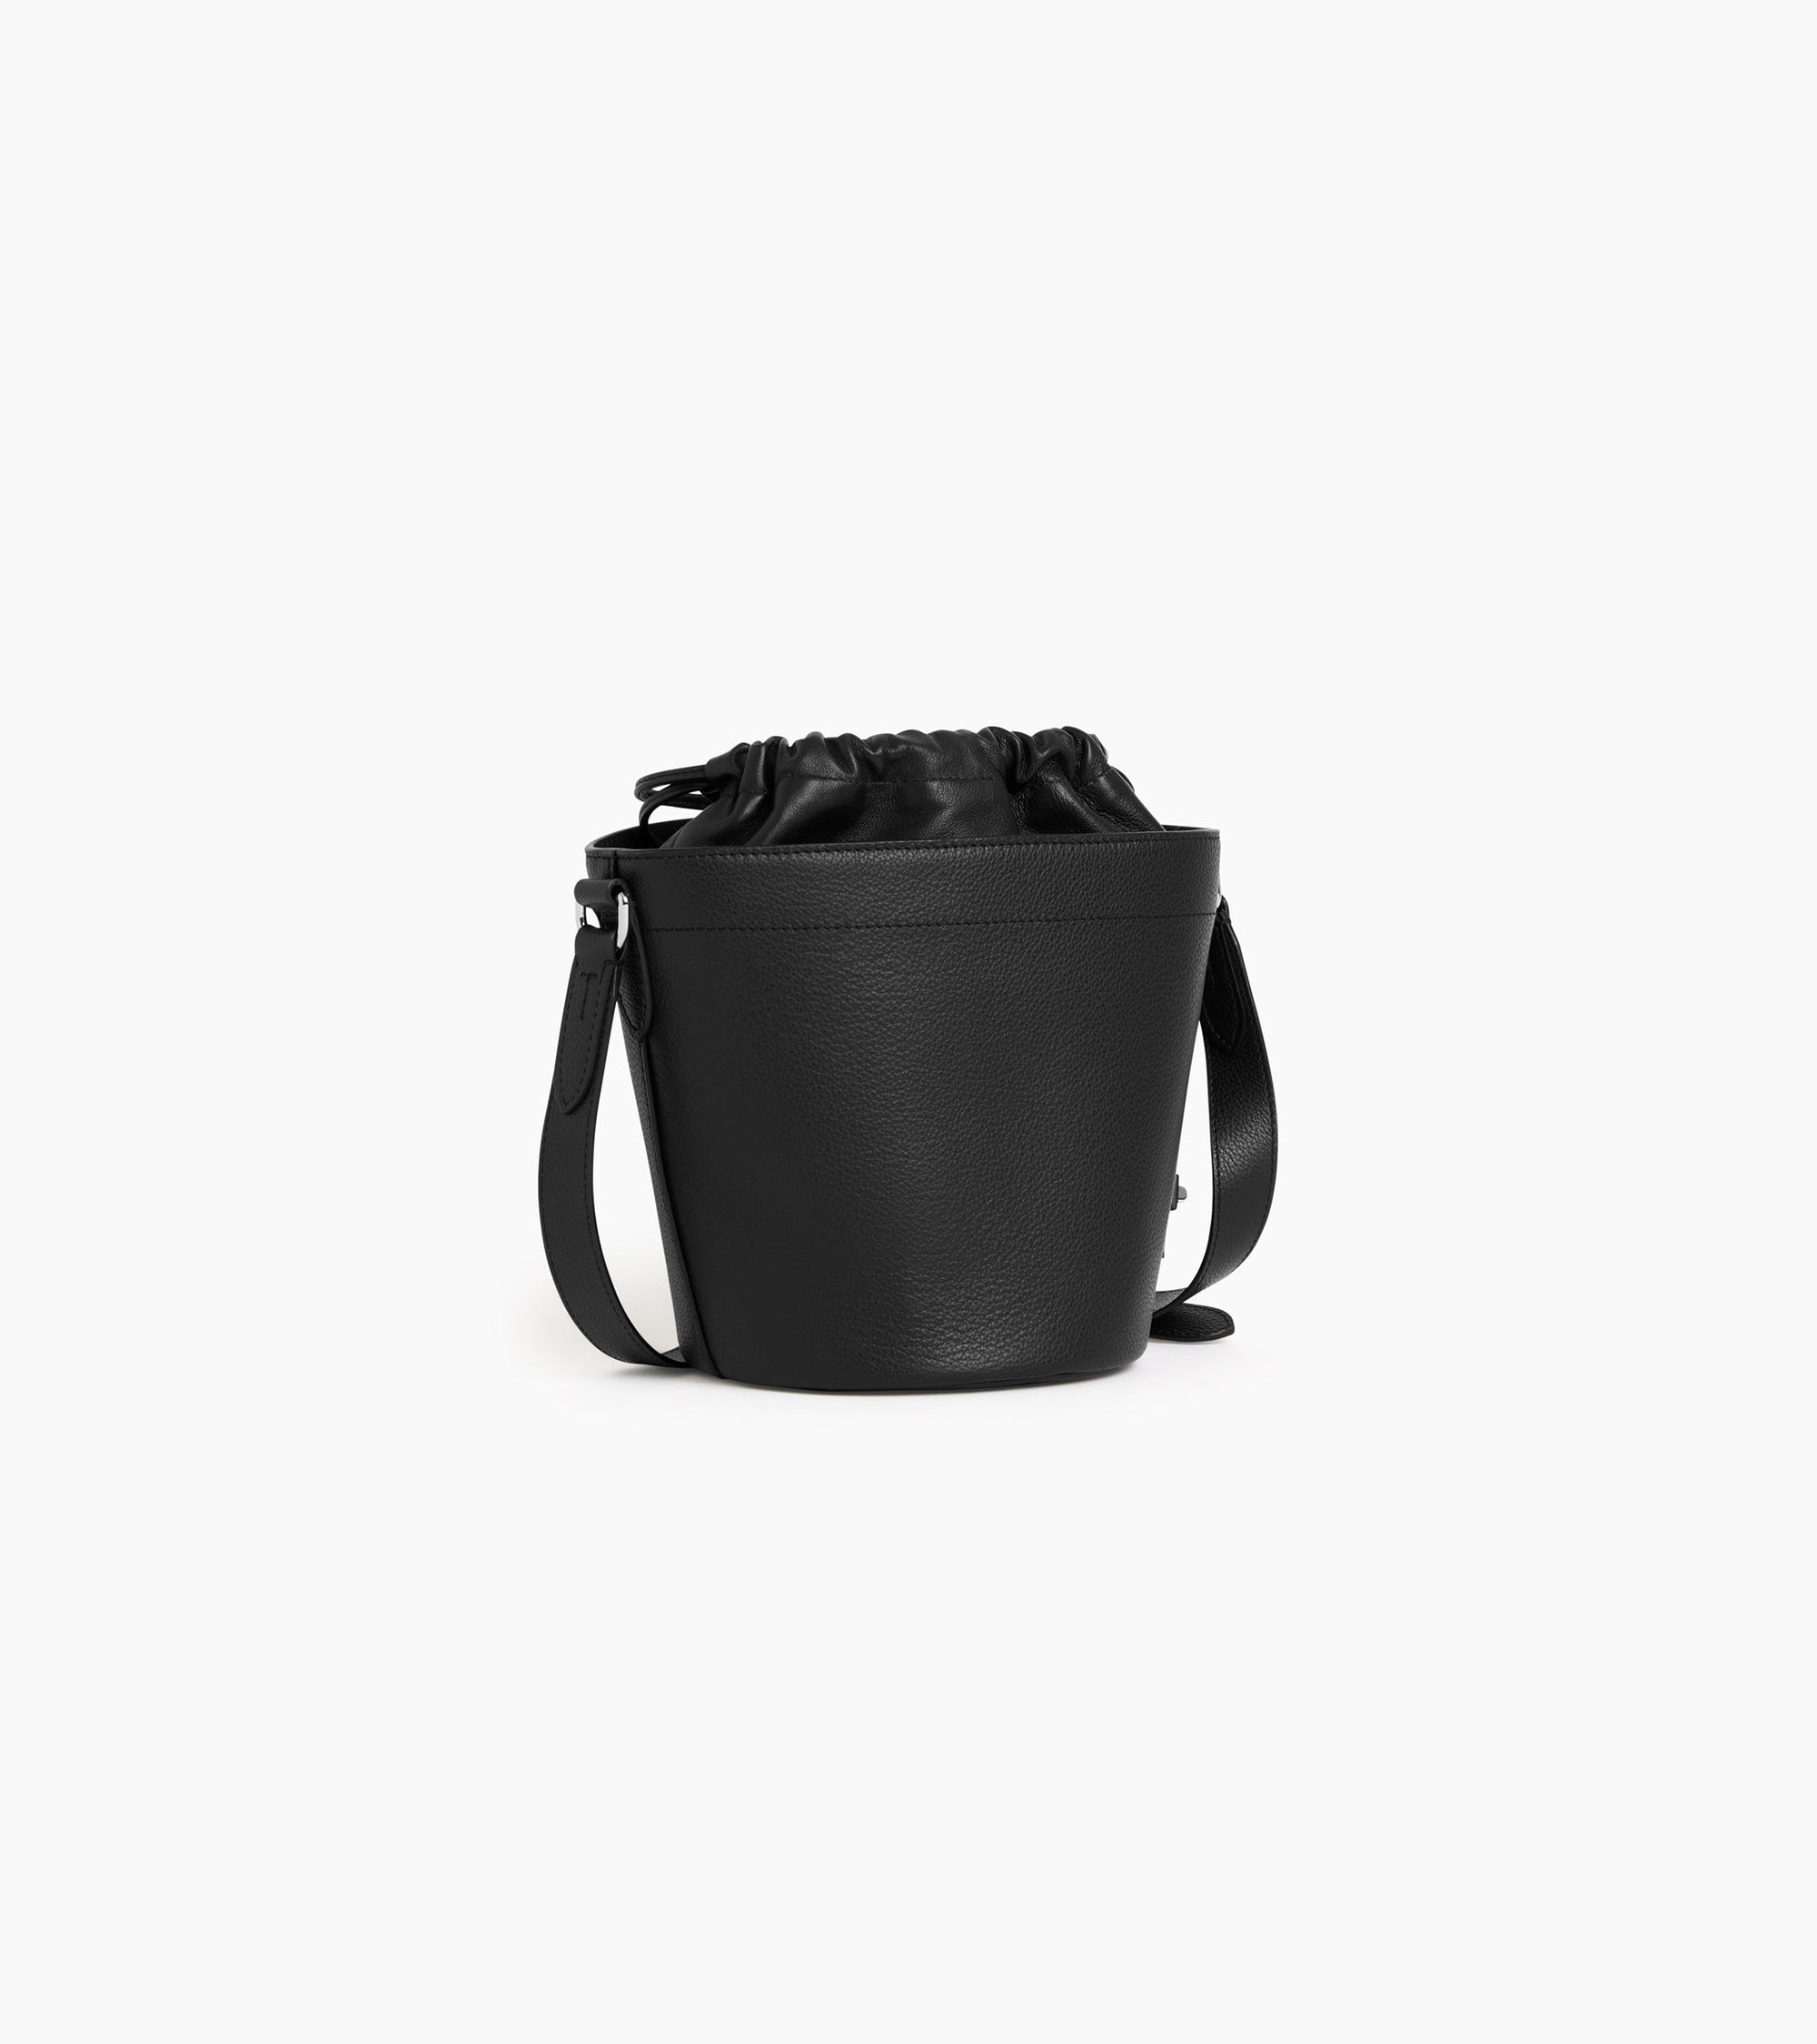 Gisèle small bucket bag in grained leather